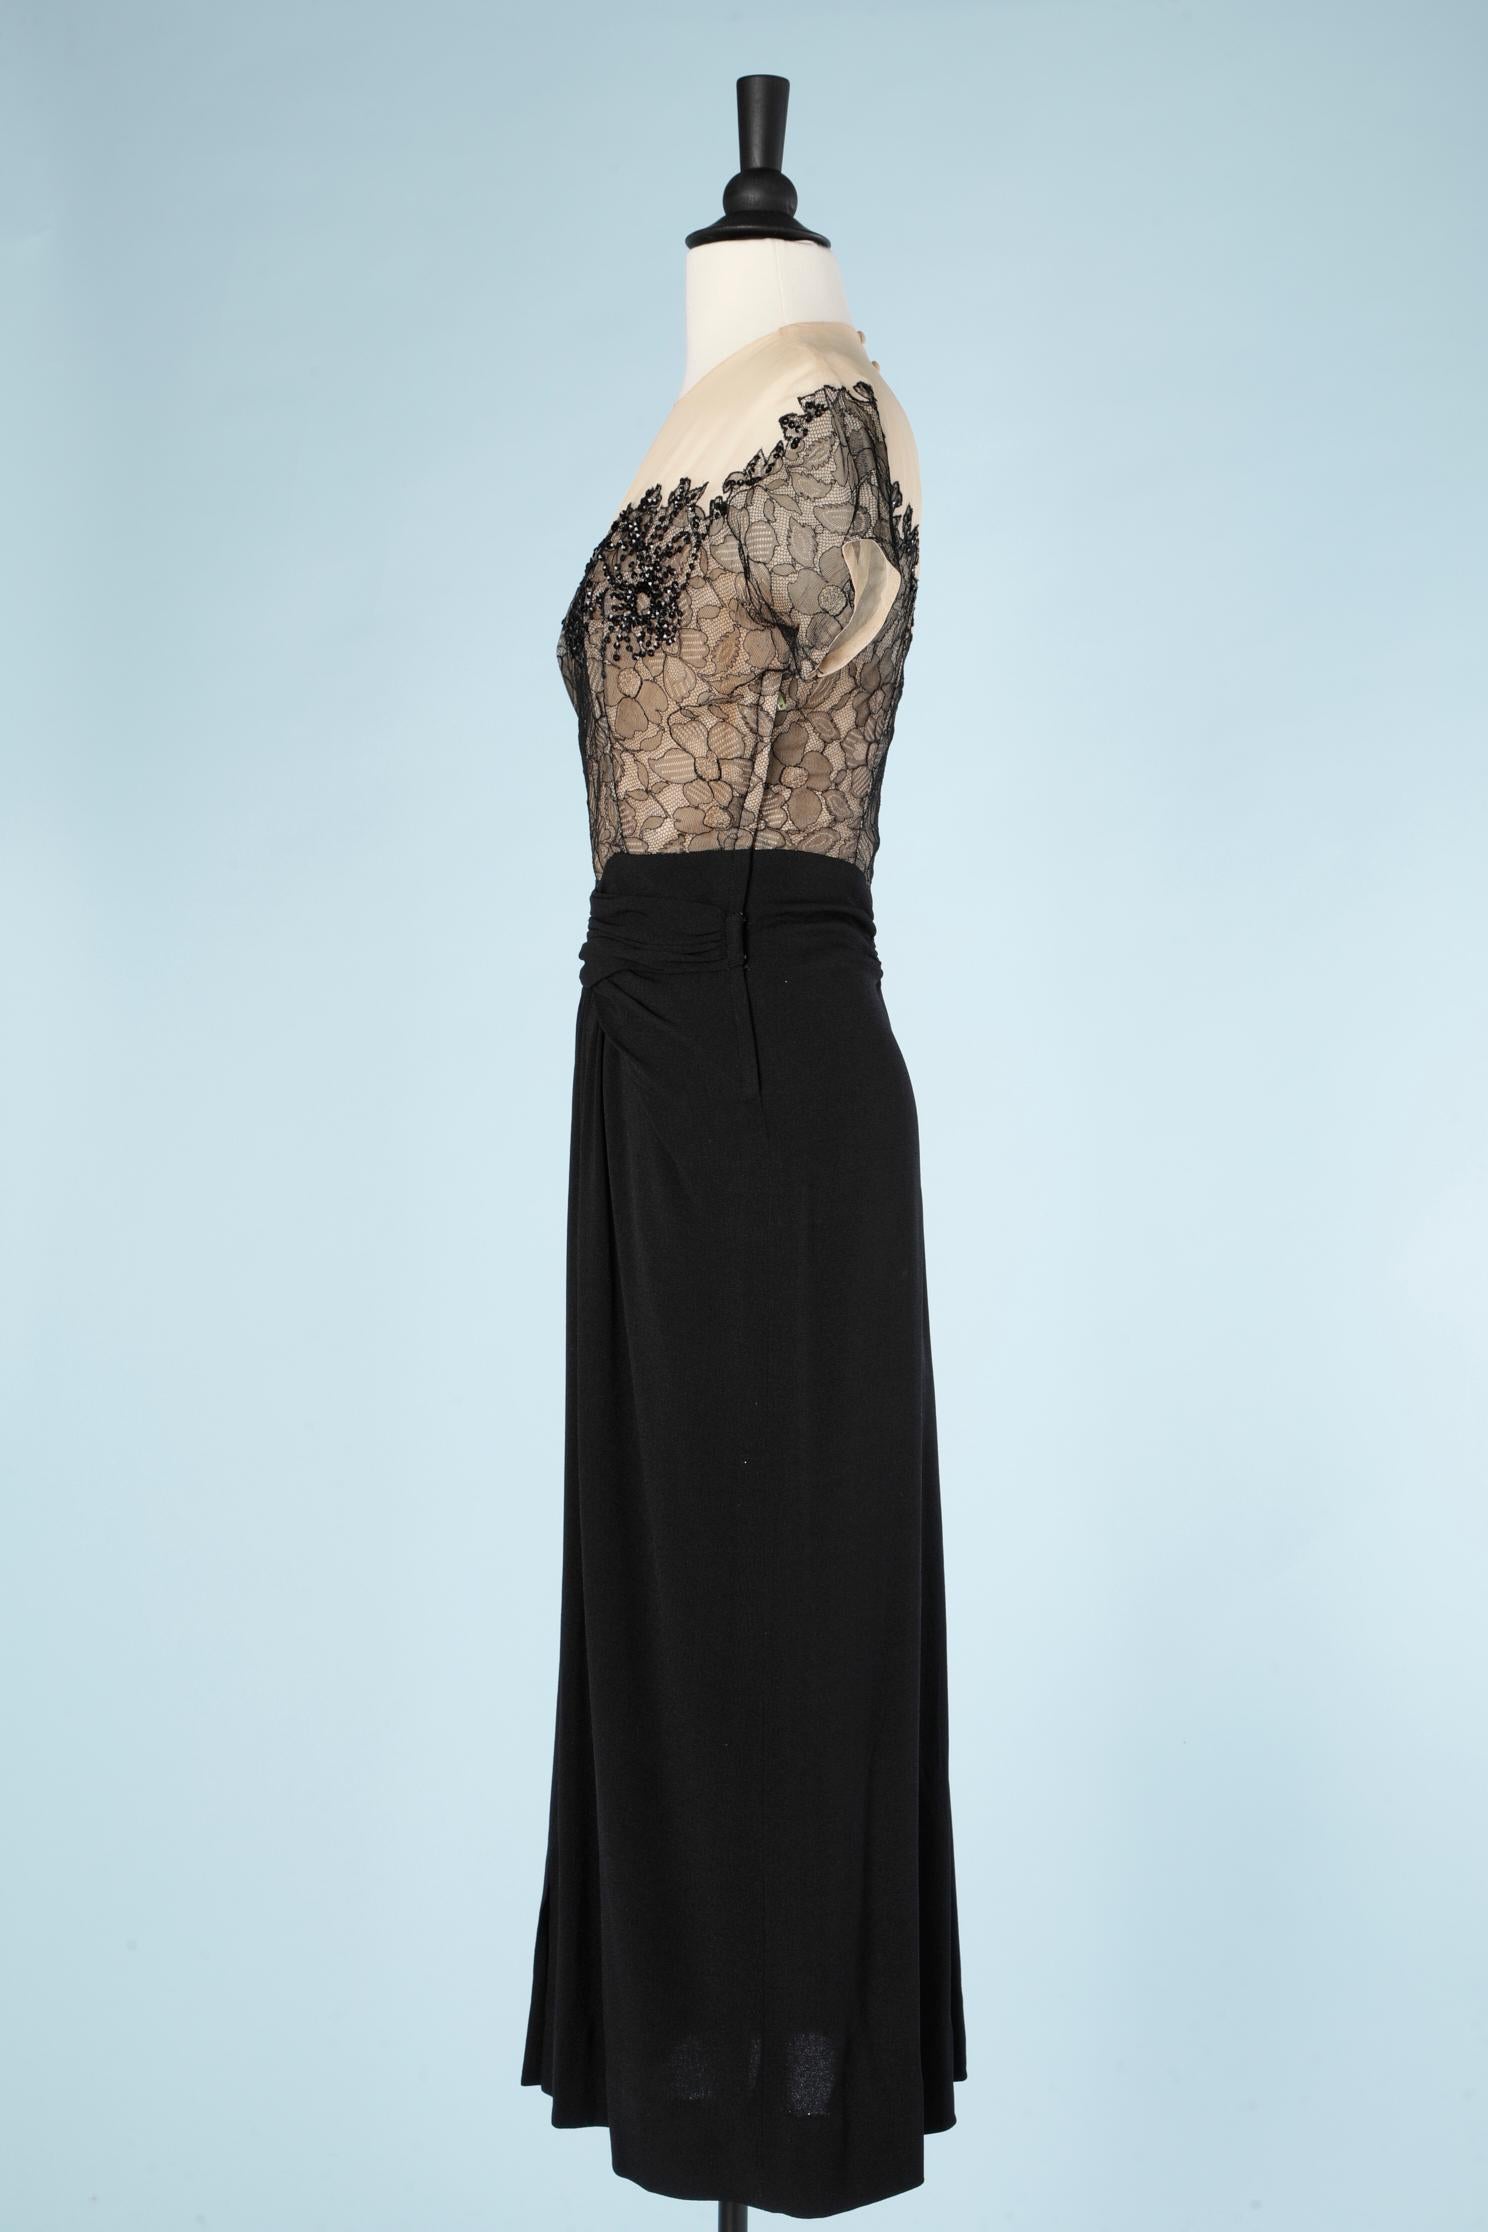 Women's 1940's cocktail dress in black crêpe and black lace appliqué on a tulle base 